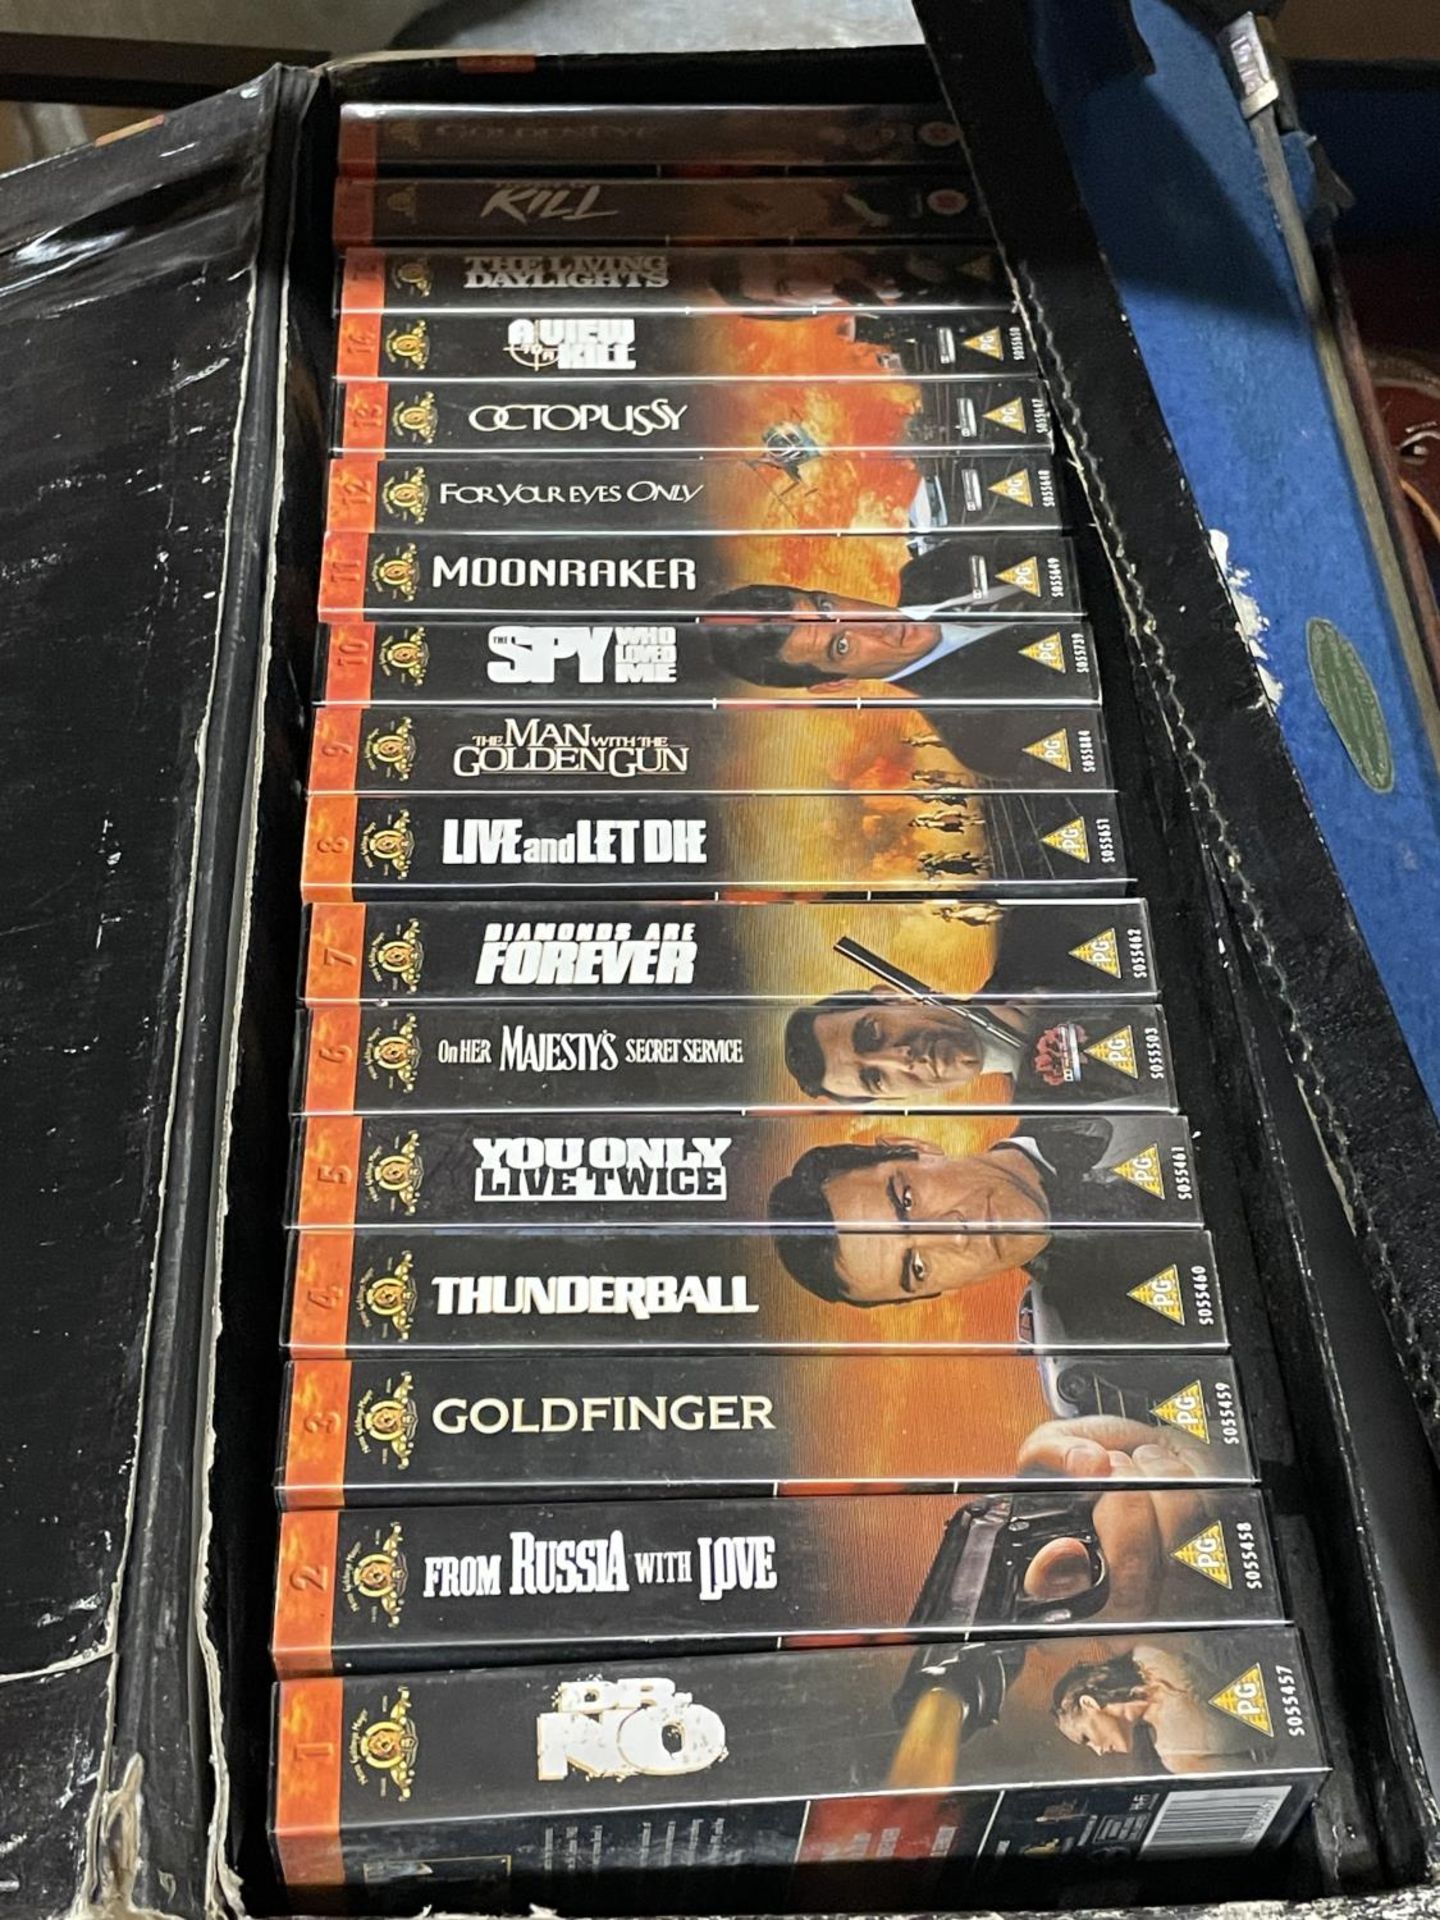 A BOXED SET OF VHS CASSETTES THE JAMES BOND 007 COLLECTION - Image 2 of 2